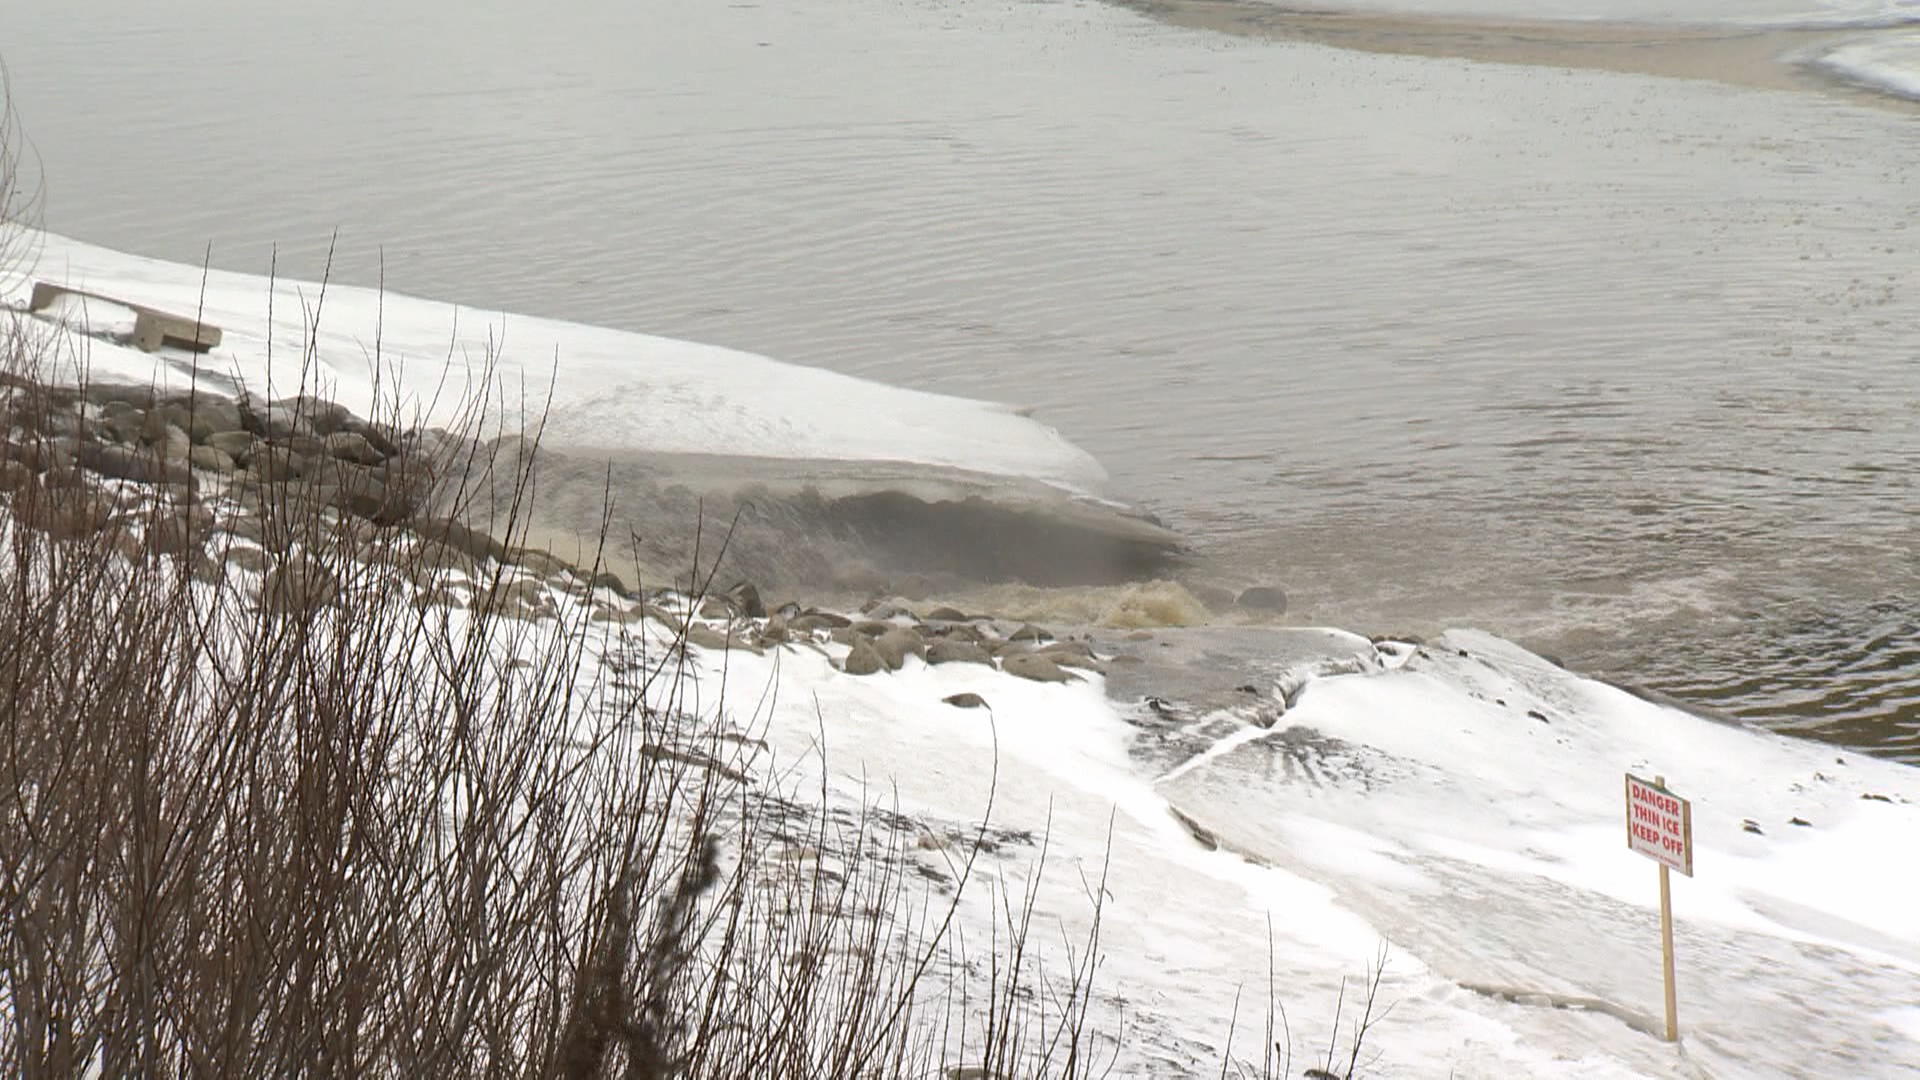 Efforts intensify to address sewage spill into Red River at Fort Garry Bridge